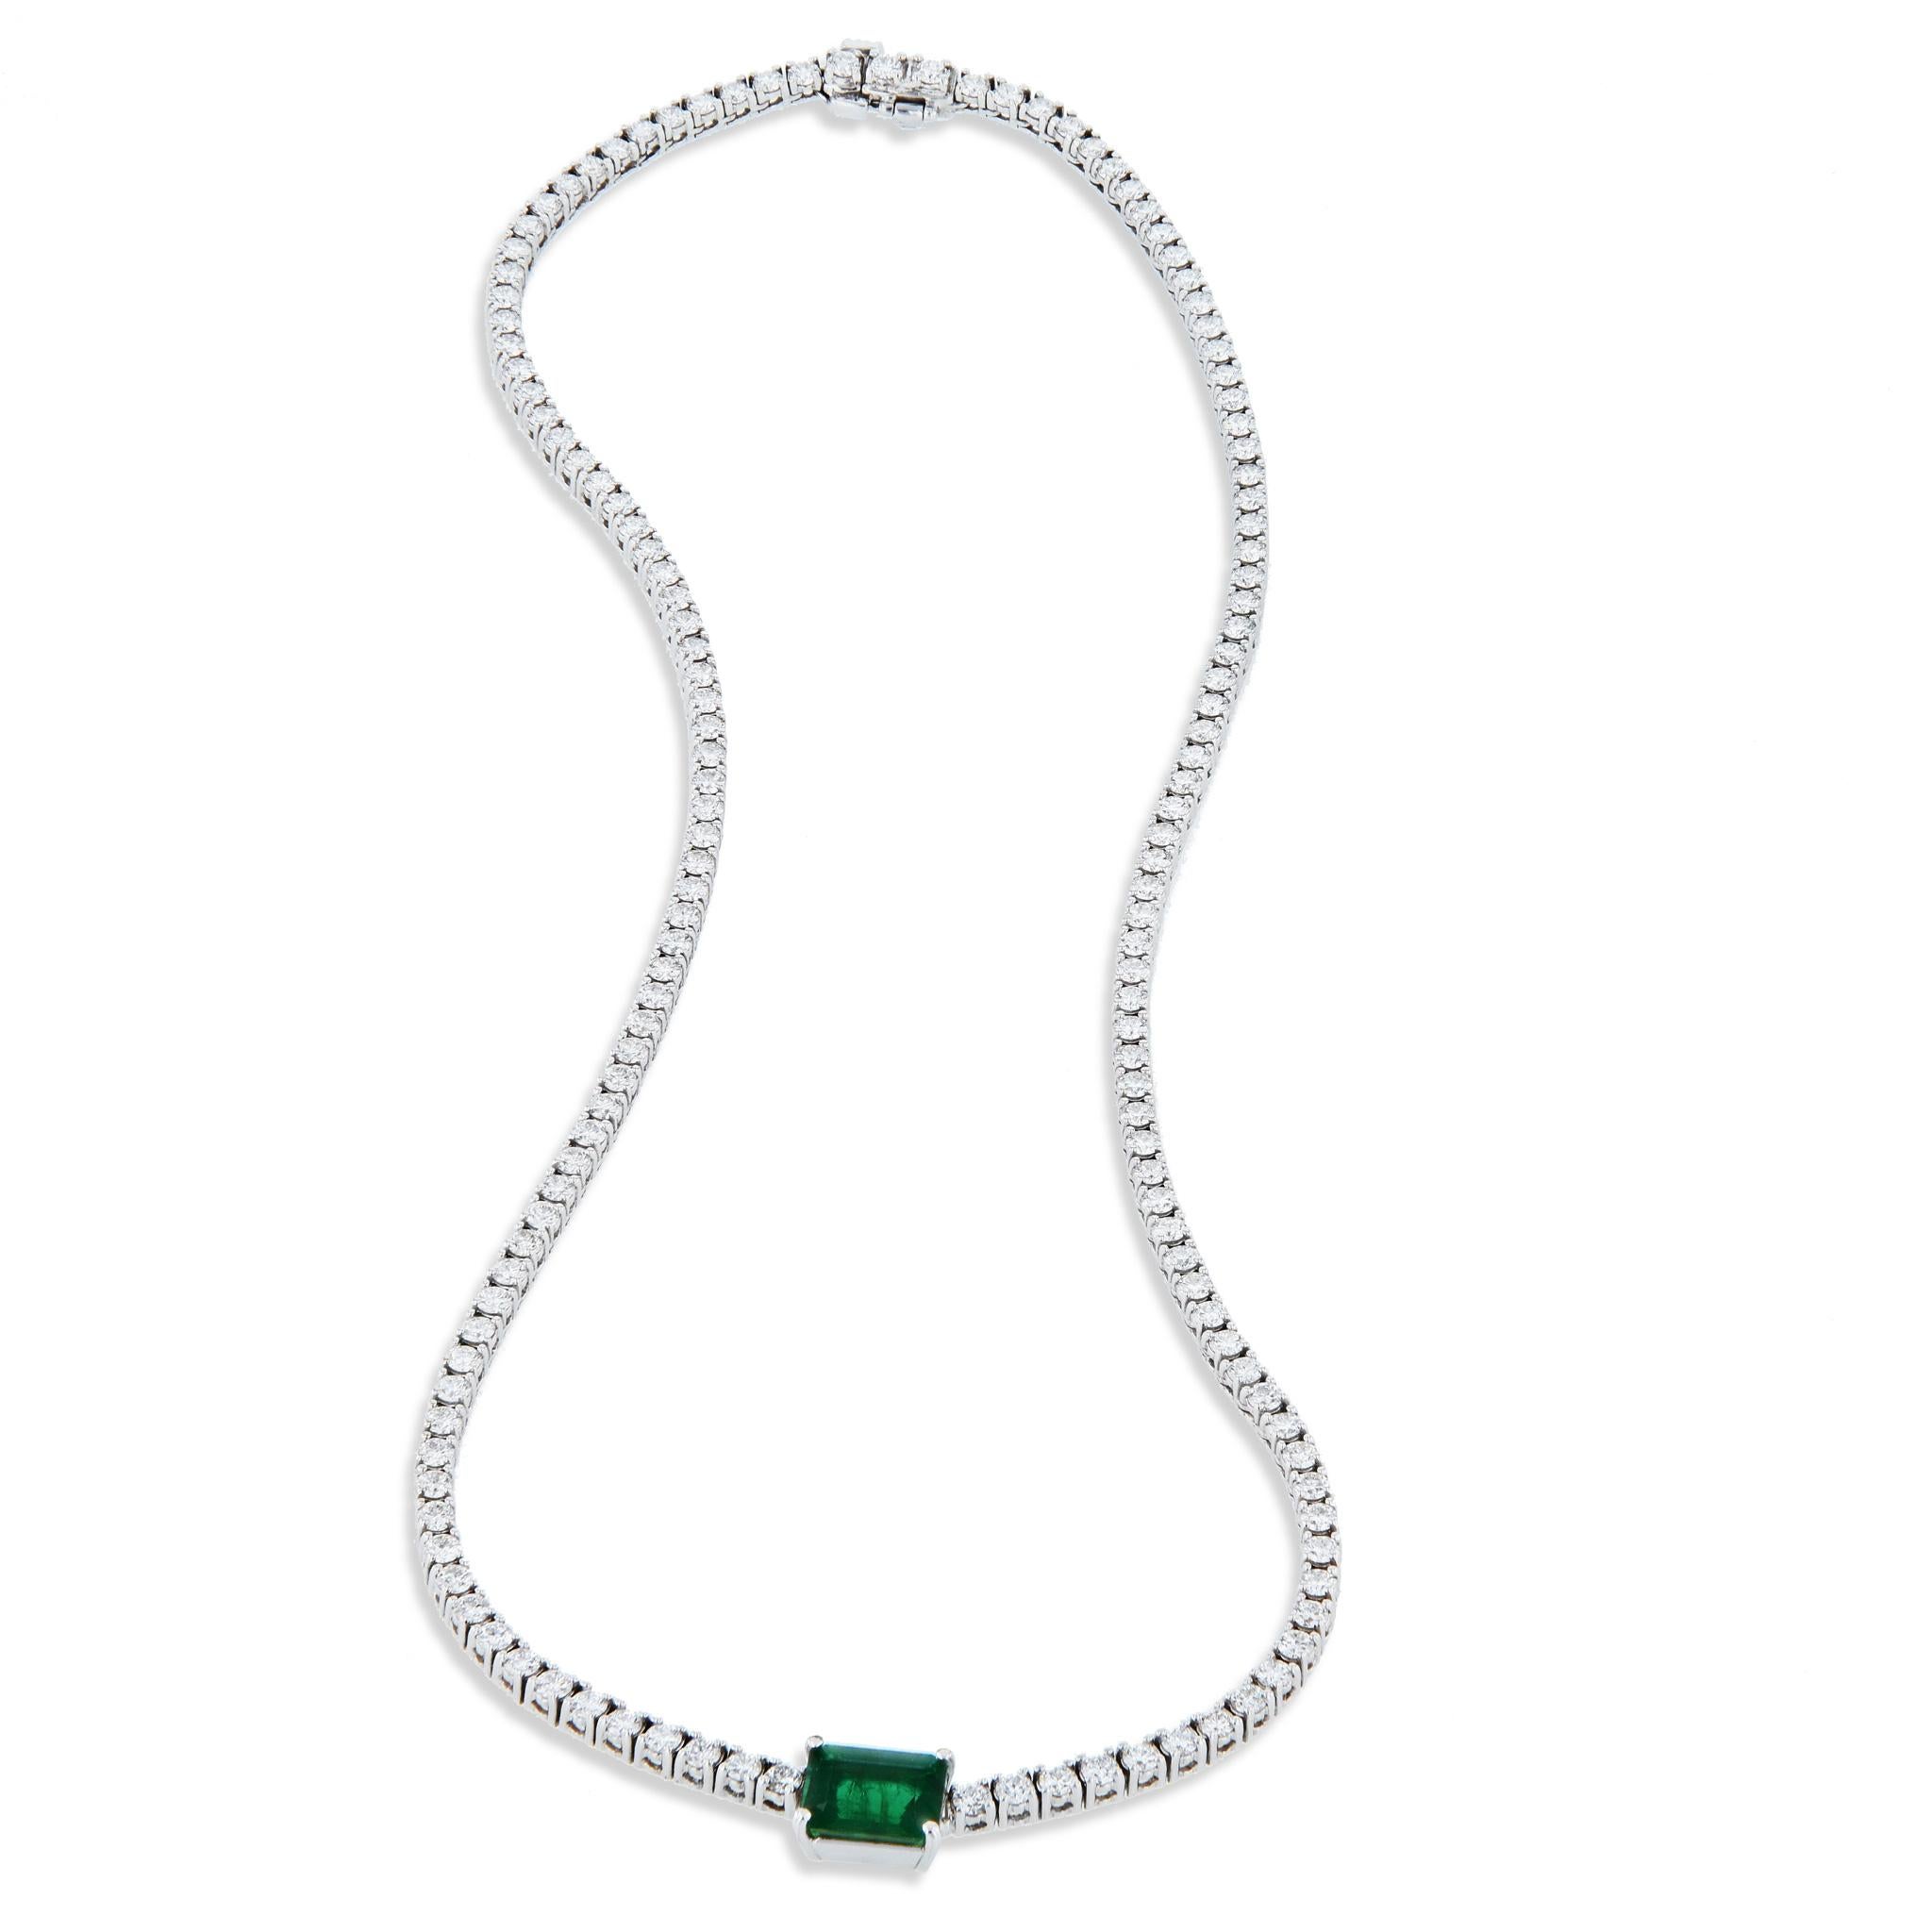 This exquisite emerald cut Zambian emerald diamond tennis necklace features 2.15 carats of emerald cut Zambian emerald 